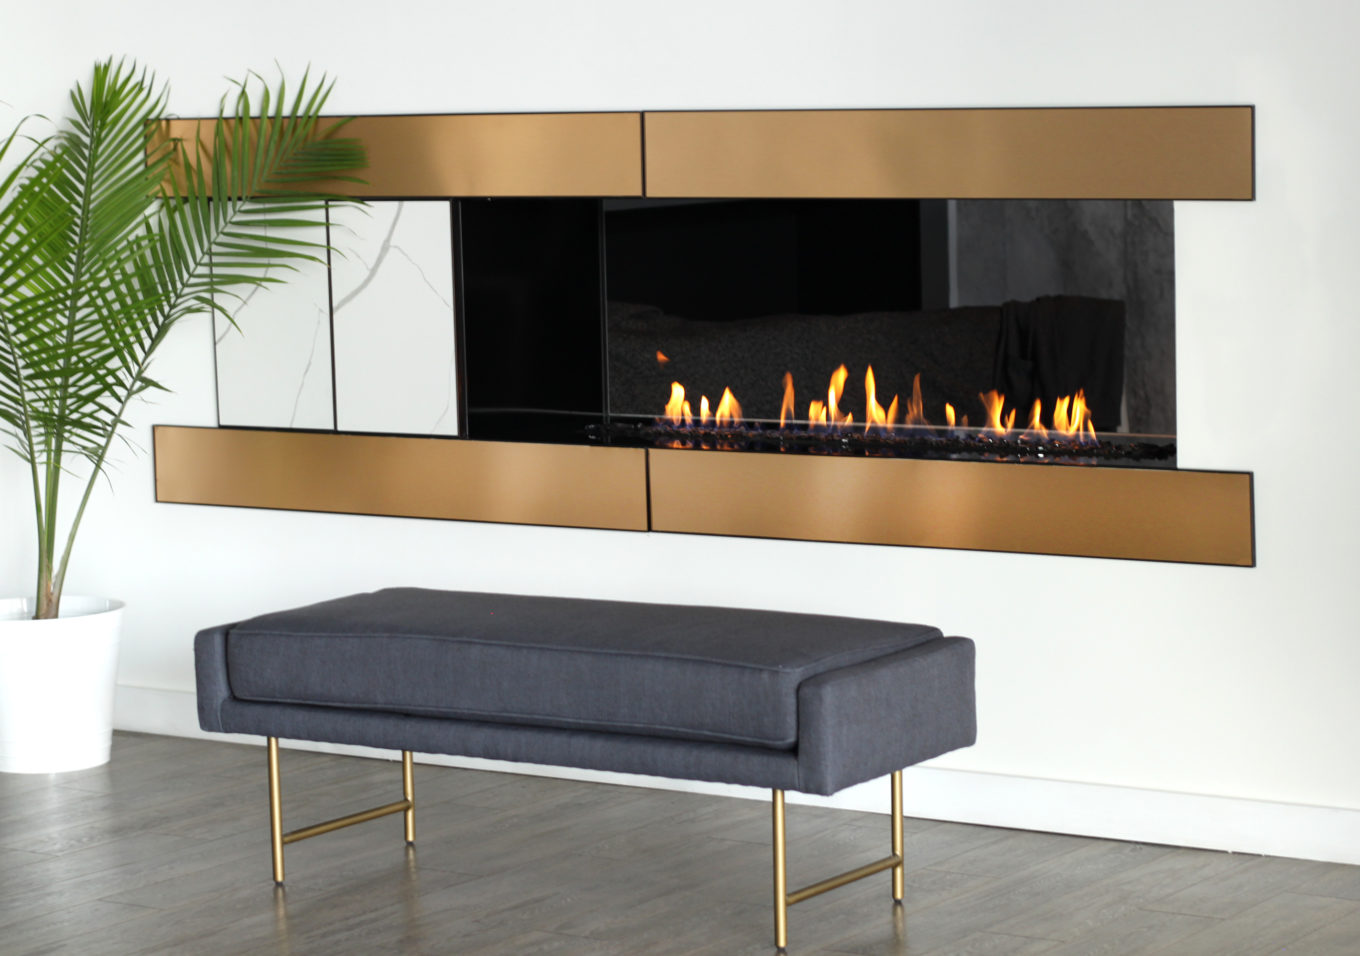 H Series Vent Free fireplace with custom fireplace surround.